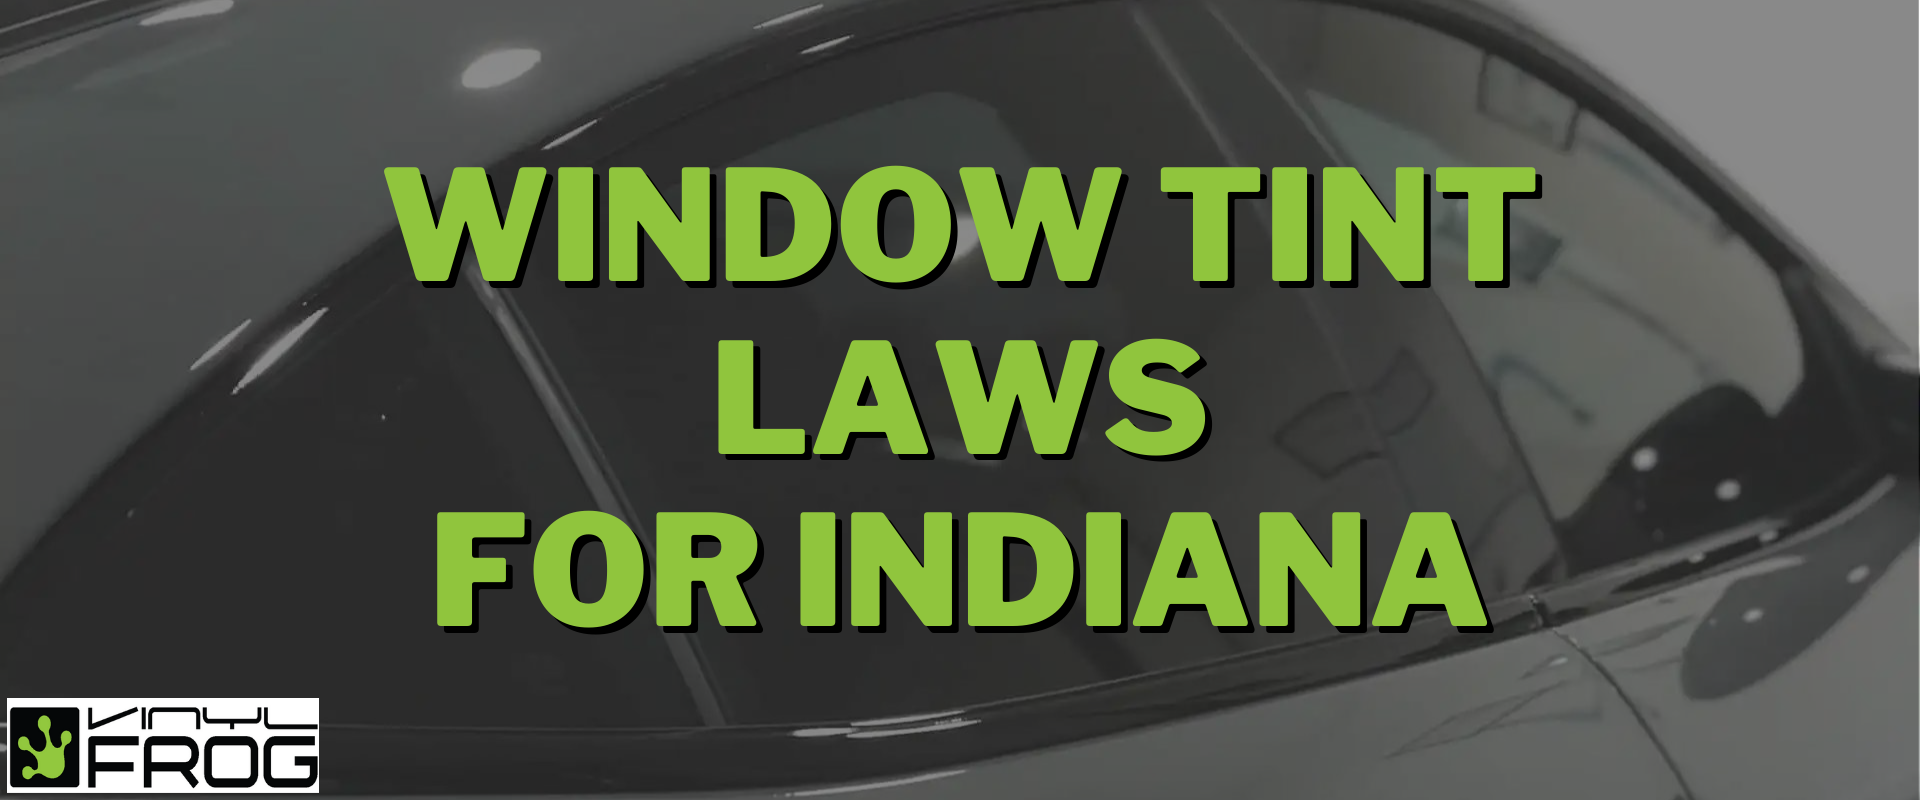 Window Tint Laws For Indiana.png__PID:04881ed7-f12d-4bb6-b96f-435036ed8819